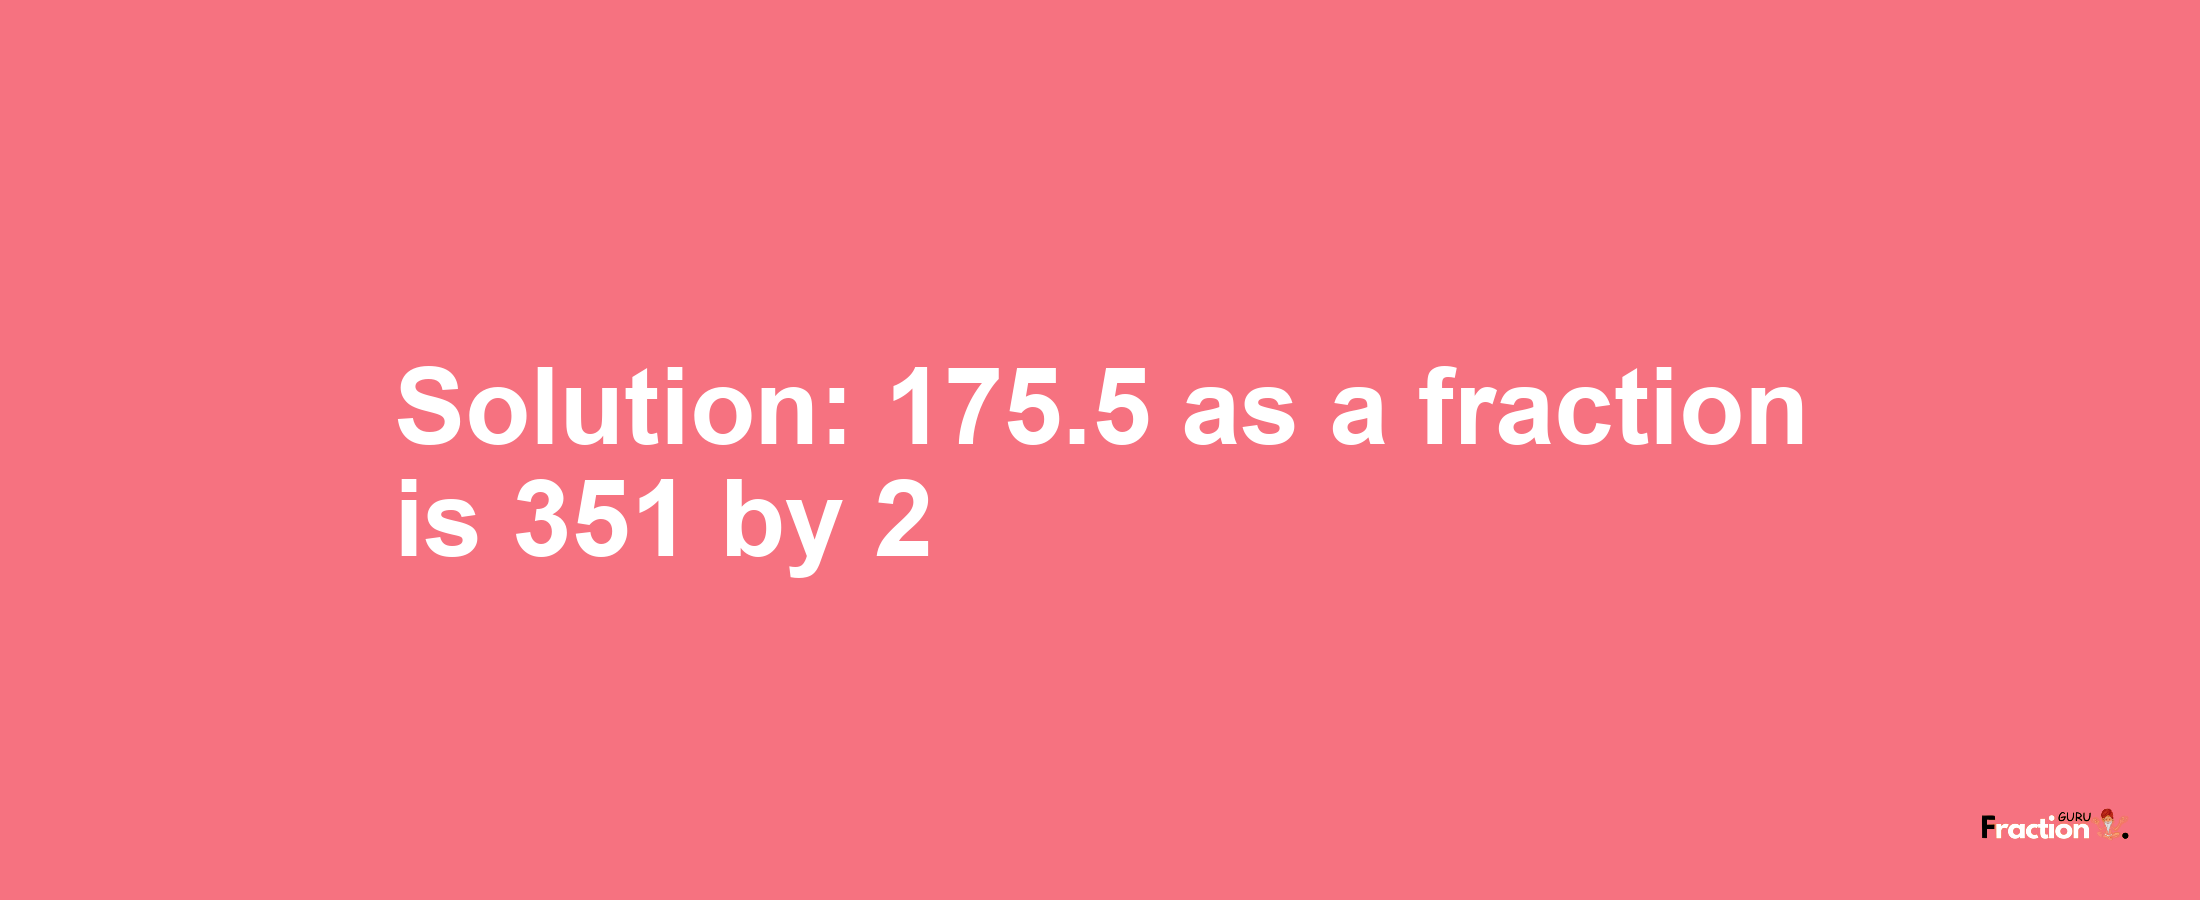 Solution:175.5 as a fraction is 351/2